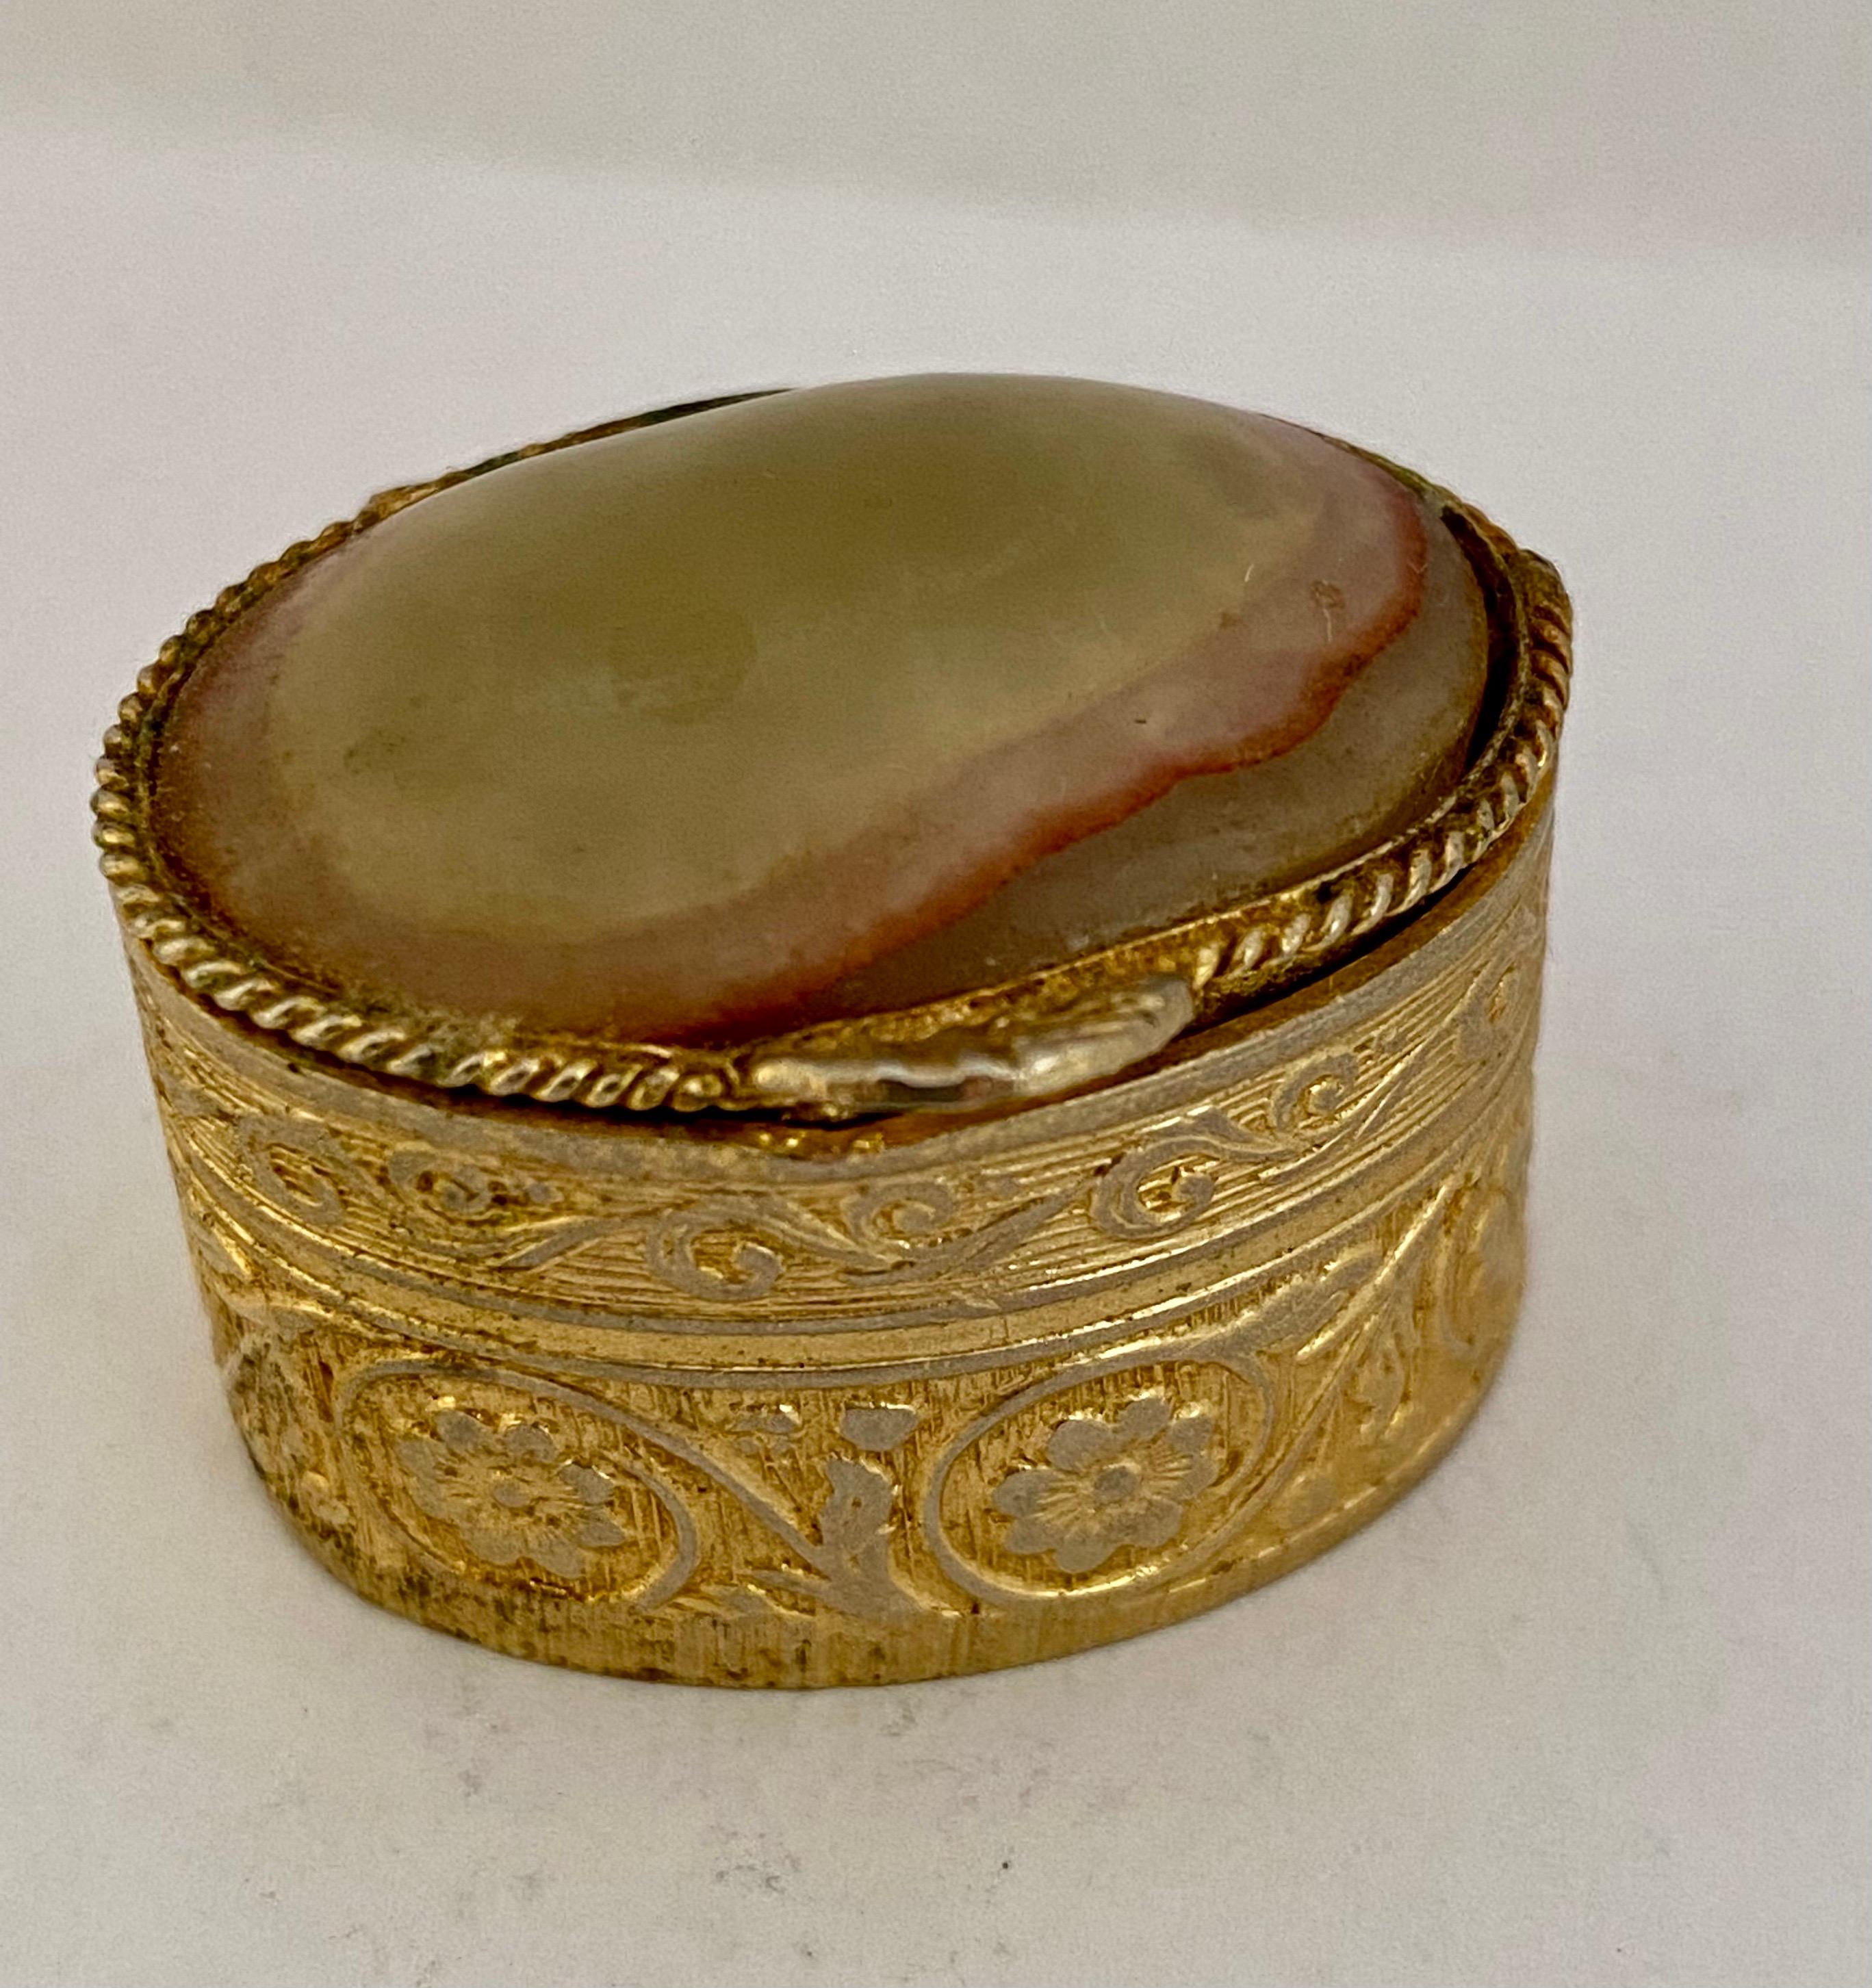 This beautiful pre-owned miniature ornate pill box is in good condition. Visible signs of ageing and wear. Please study the images carefully as form part of the description.